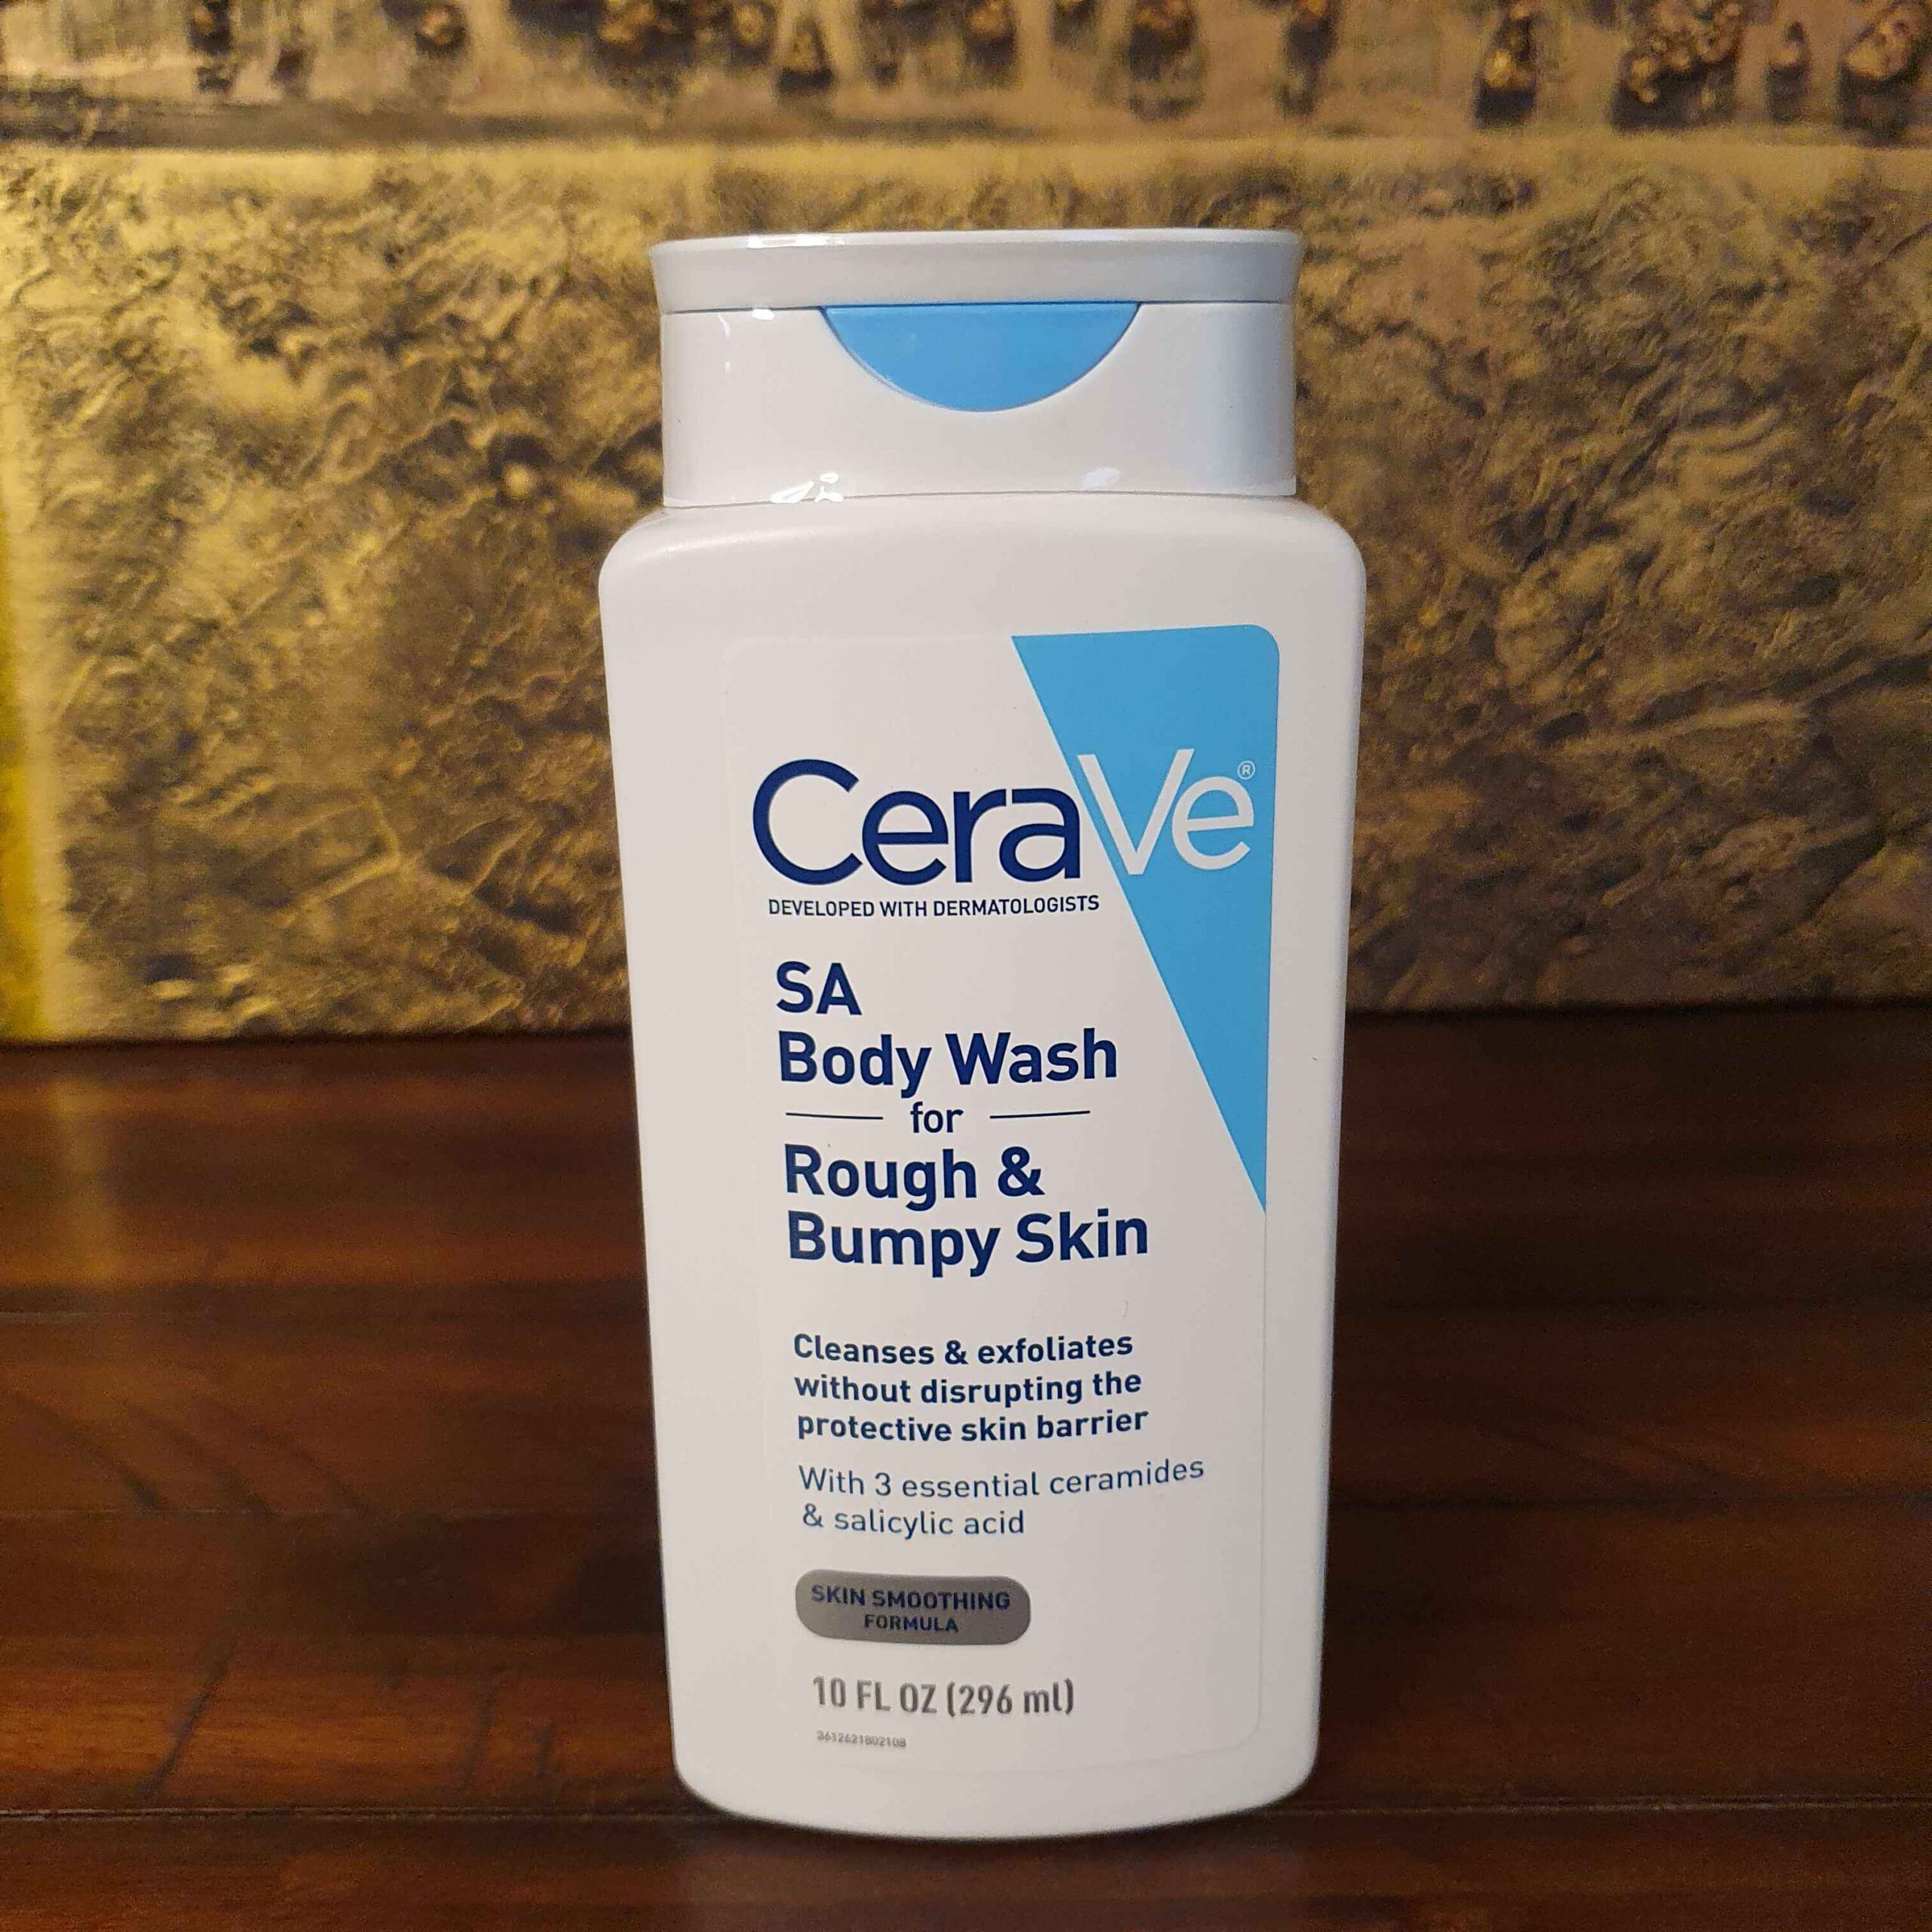 CeraVe SA Body Wash for Rough and Bumpy Skin 296ml